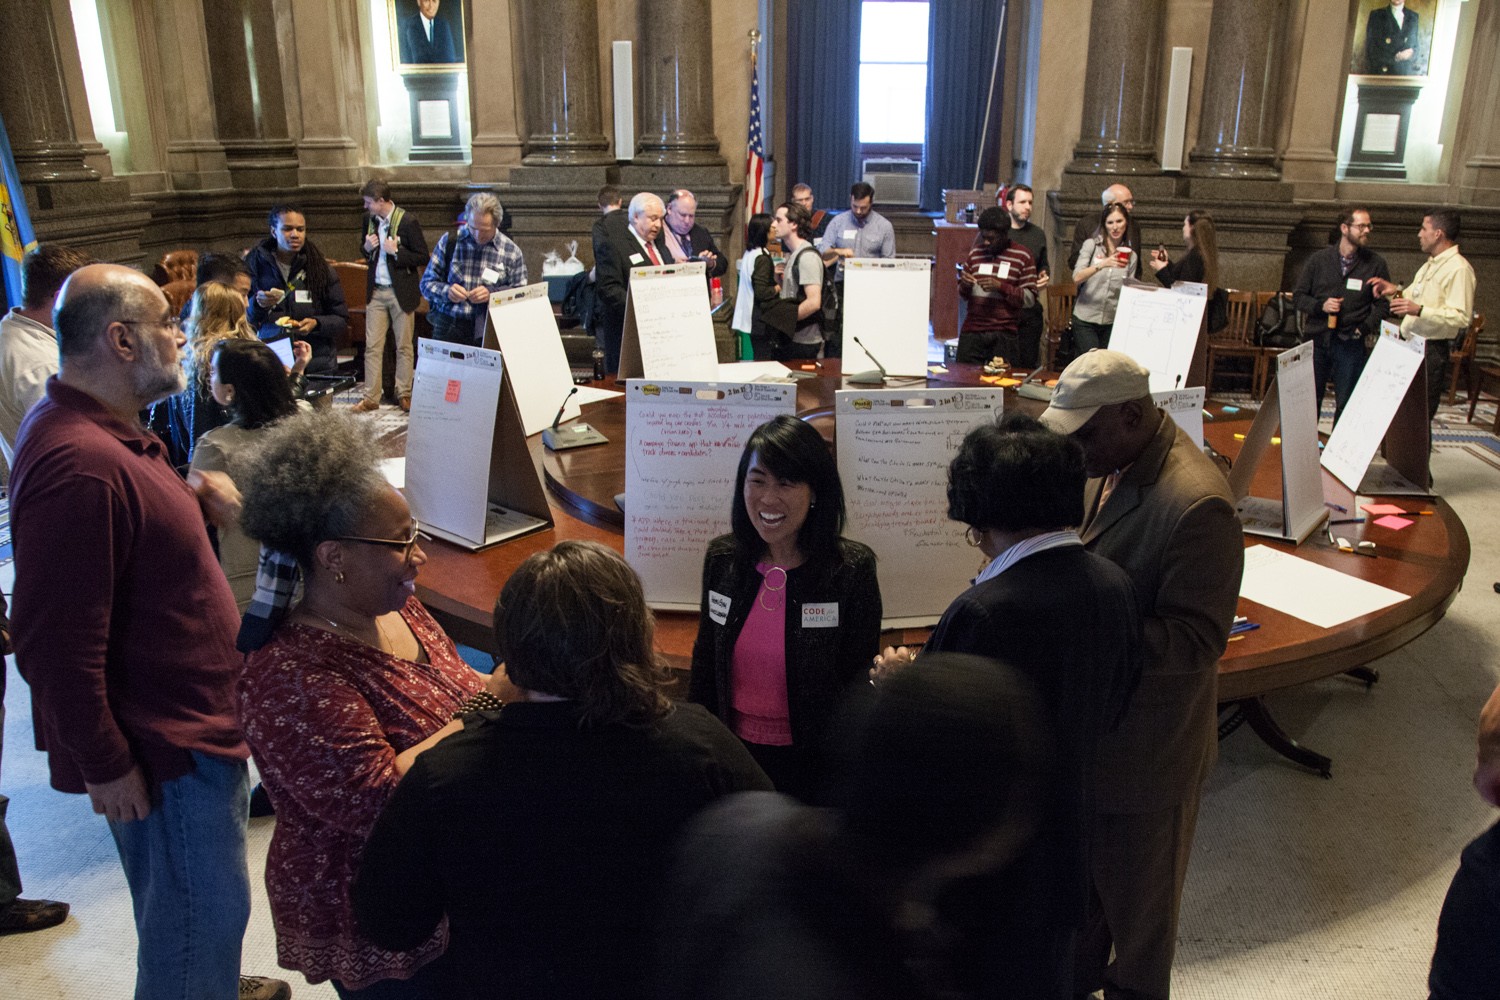 Community Needs Assesment Night at Democracy Hackathon 2016. Elected officials and citizens met to discuss the future of our city in City Hall's Caucus Room.